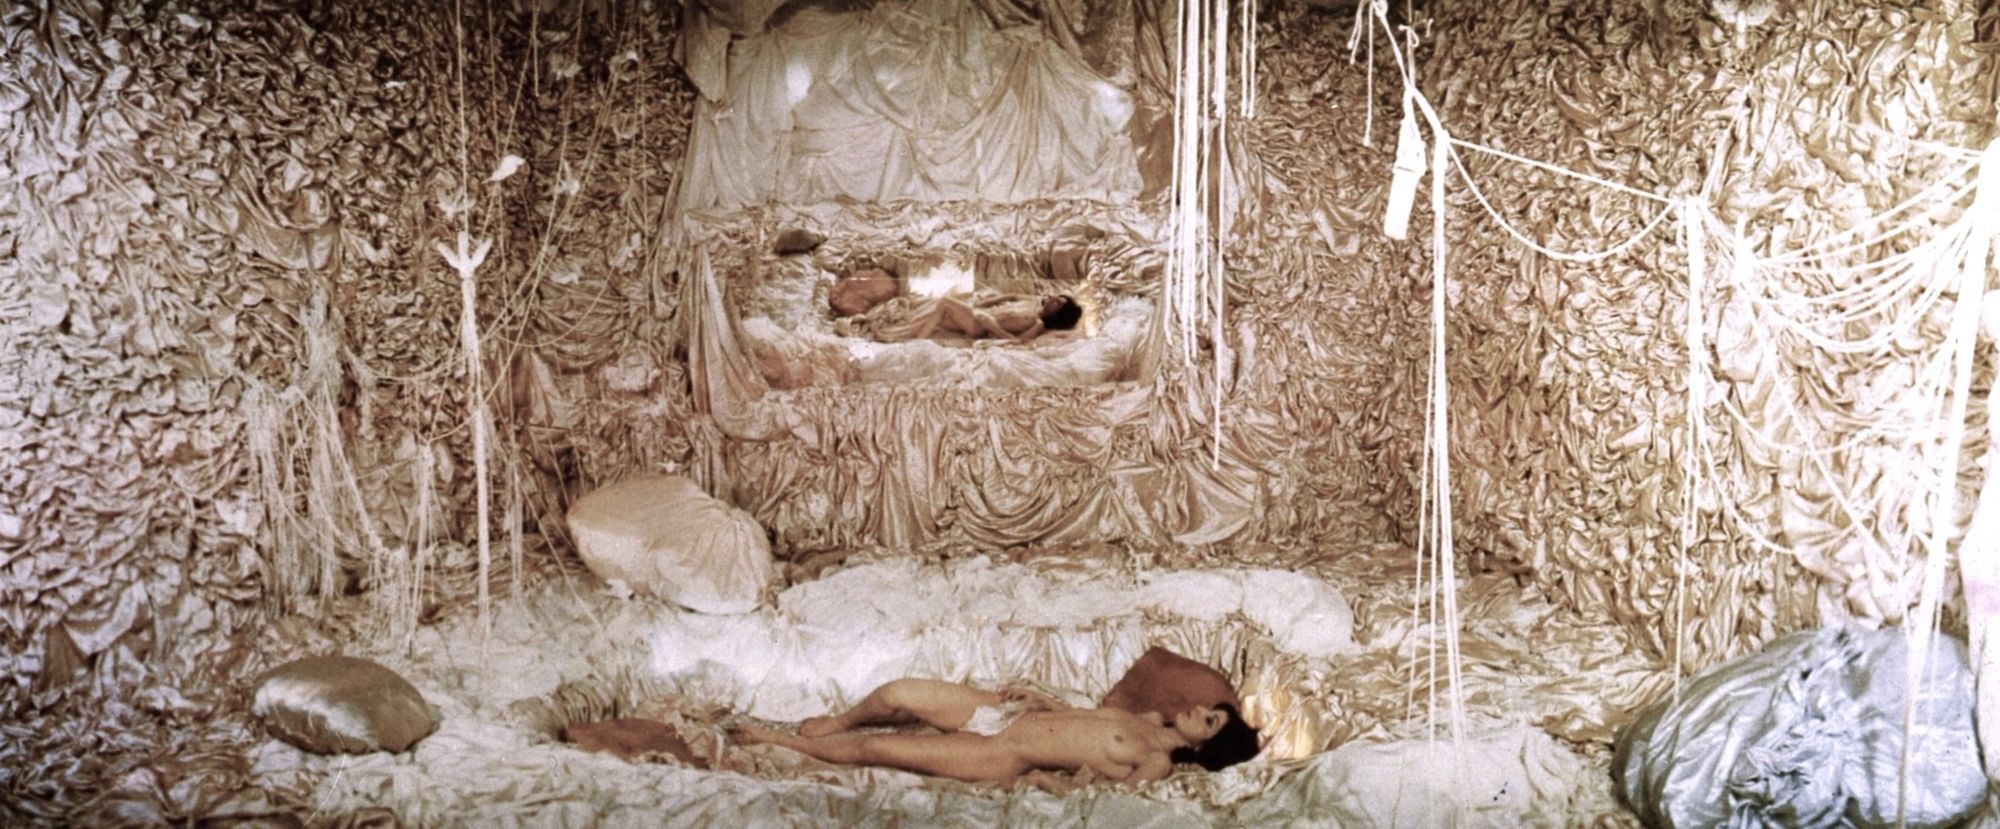 A naked woman slumbers in a room festooned with beige silk and string.